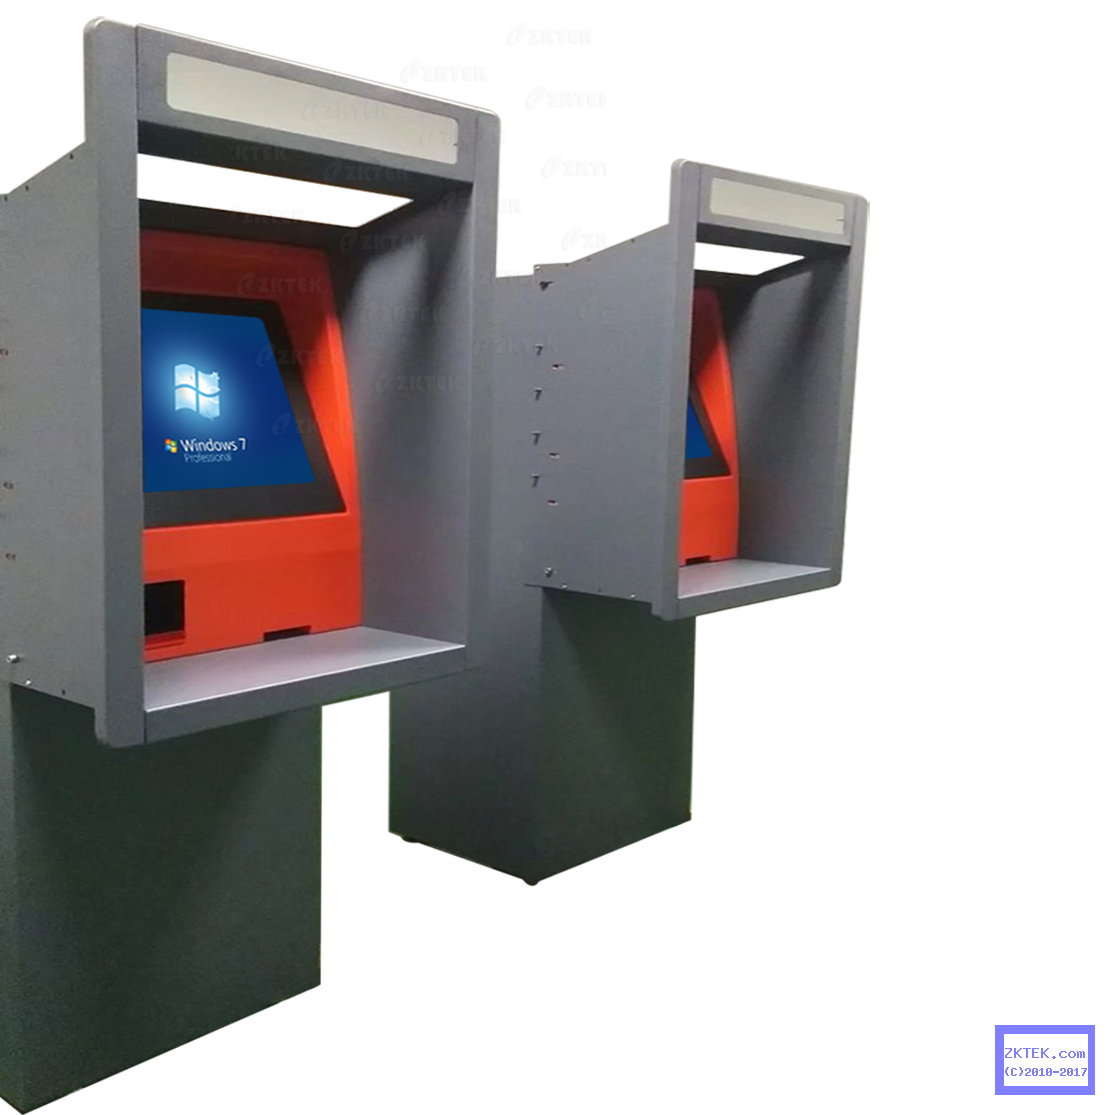 AW38 17" touch screen wall-through ATM with cash dispenser, ticket printer and industrial computer